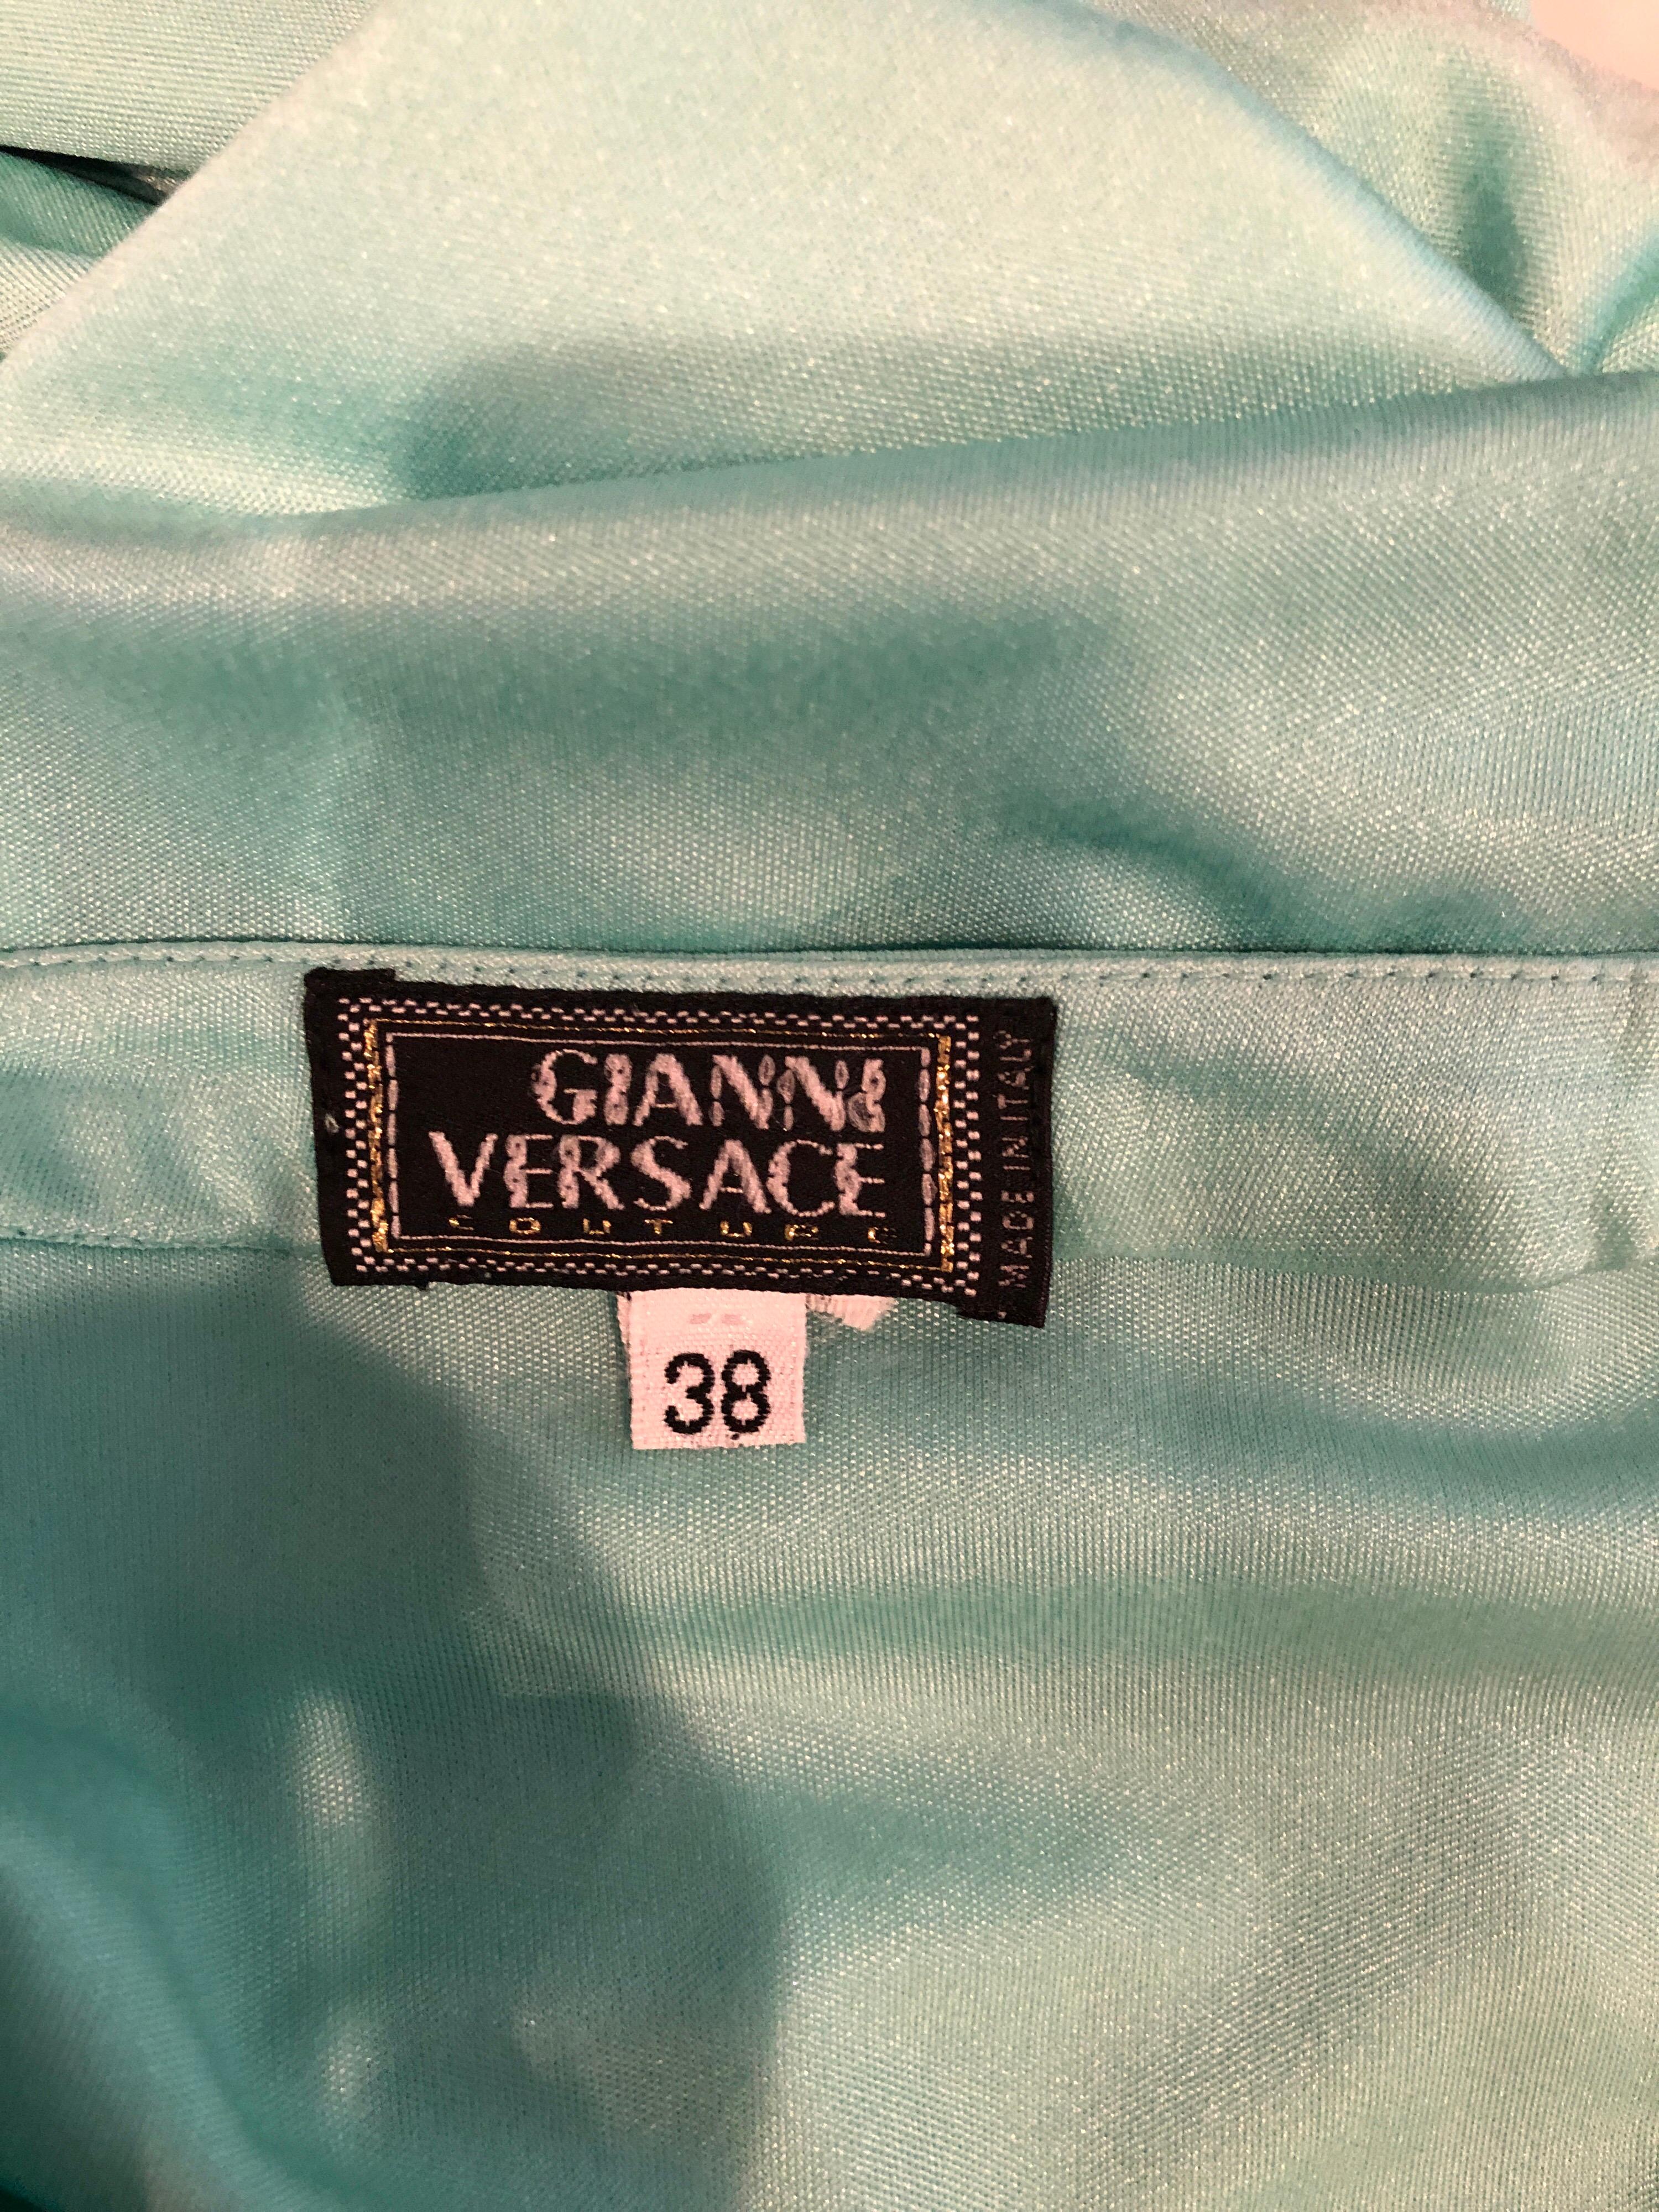 1990s Gianni Versace Couture Teal Turquoise Blue Silk Jersey Vintage 90s Skirt For Sale 7